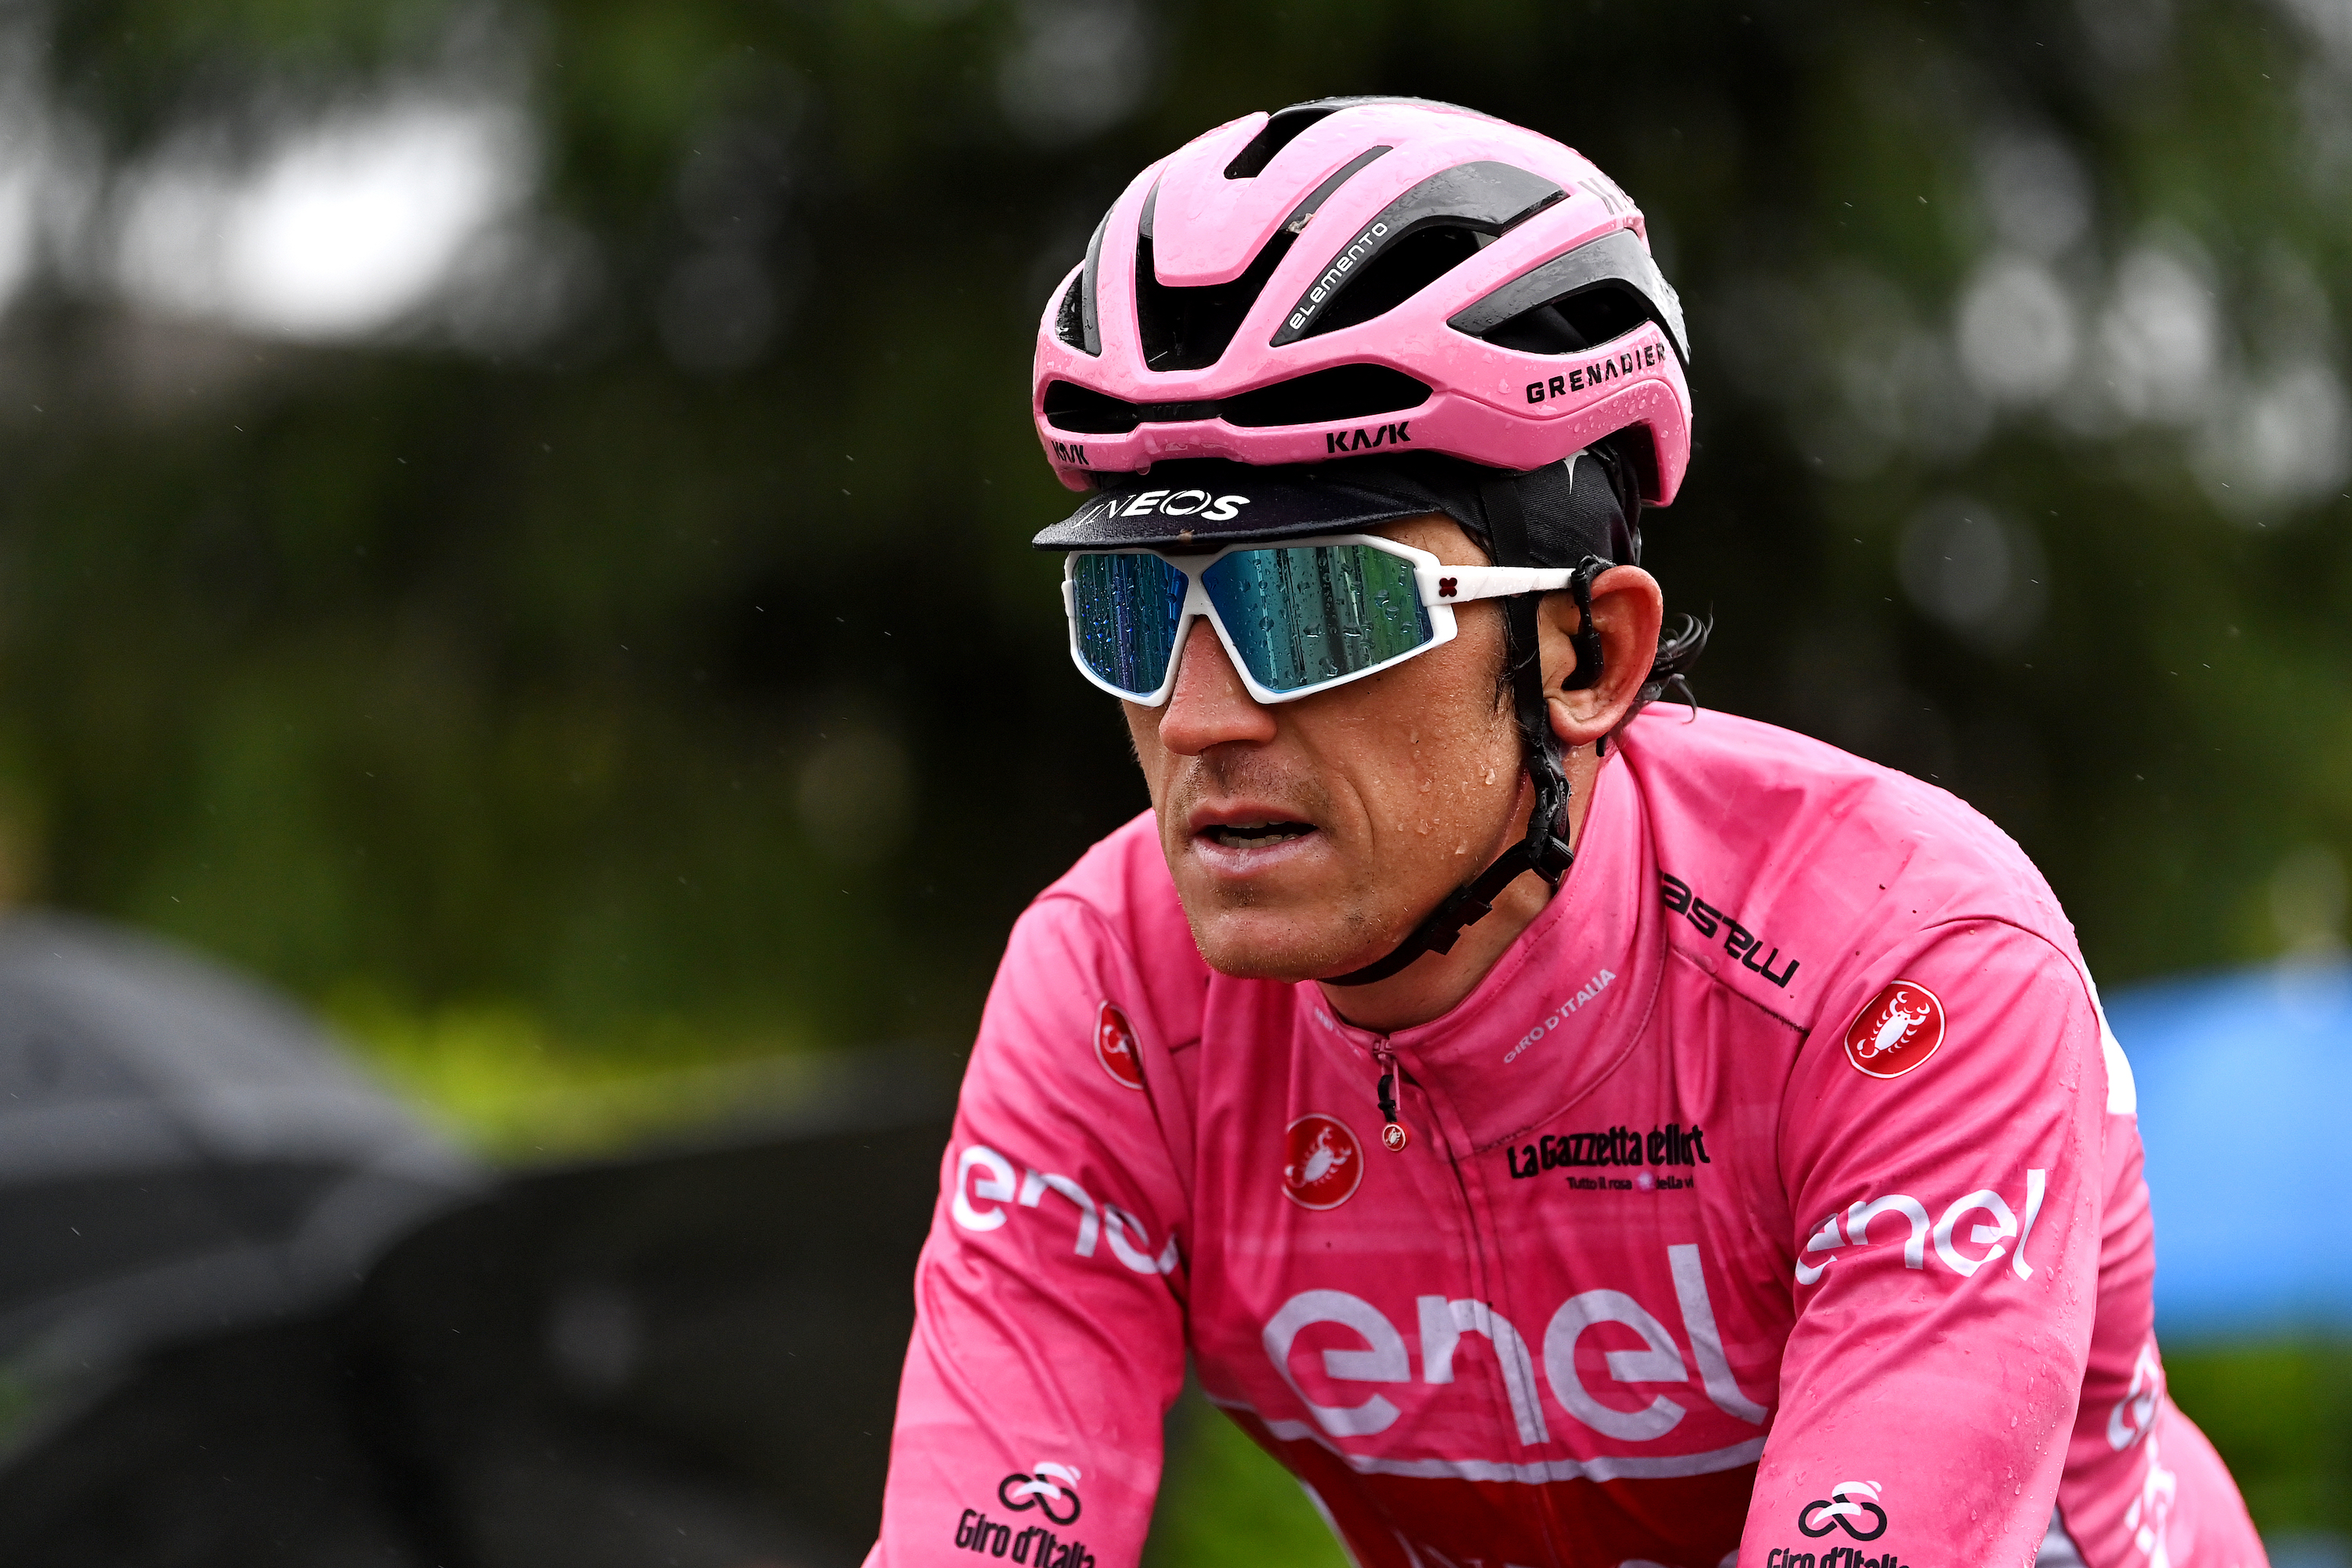 From drawing to Giro d'Italia in 2 months: How SunGod reinvented Geraint  Thomas' iconic sunglasses